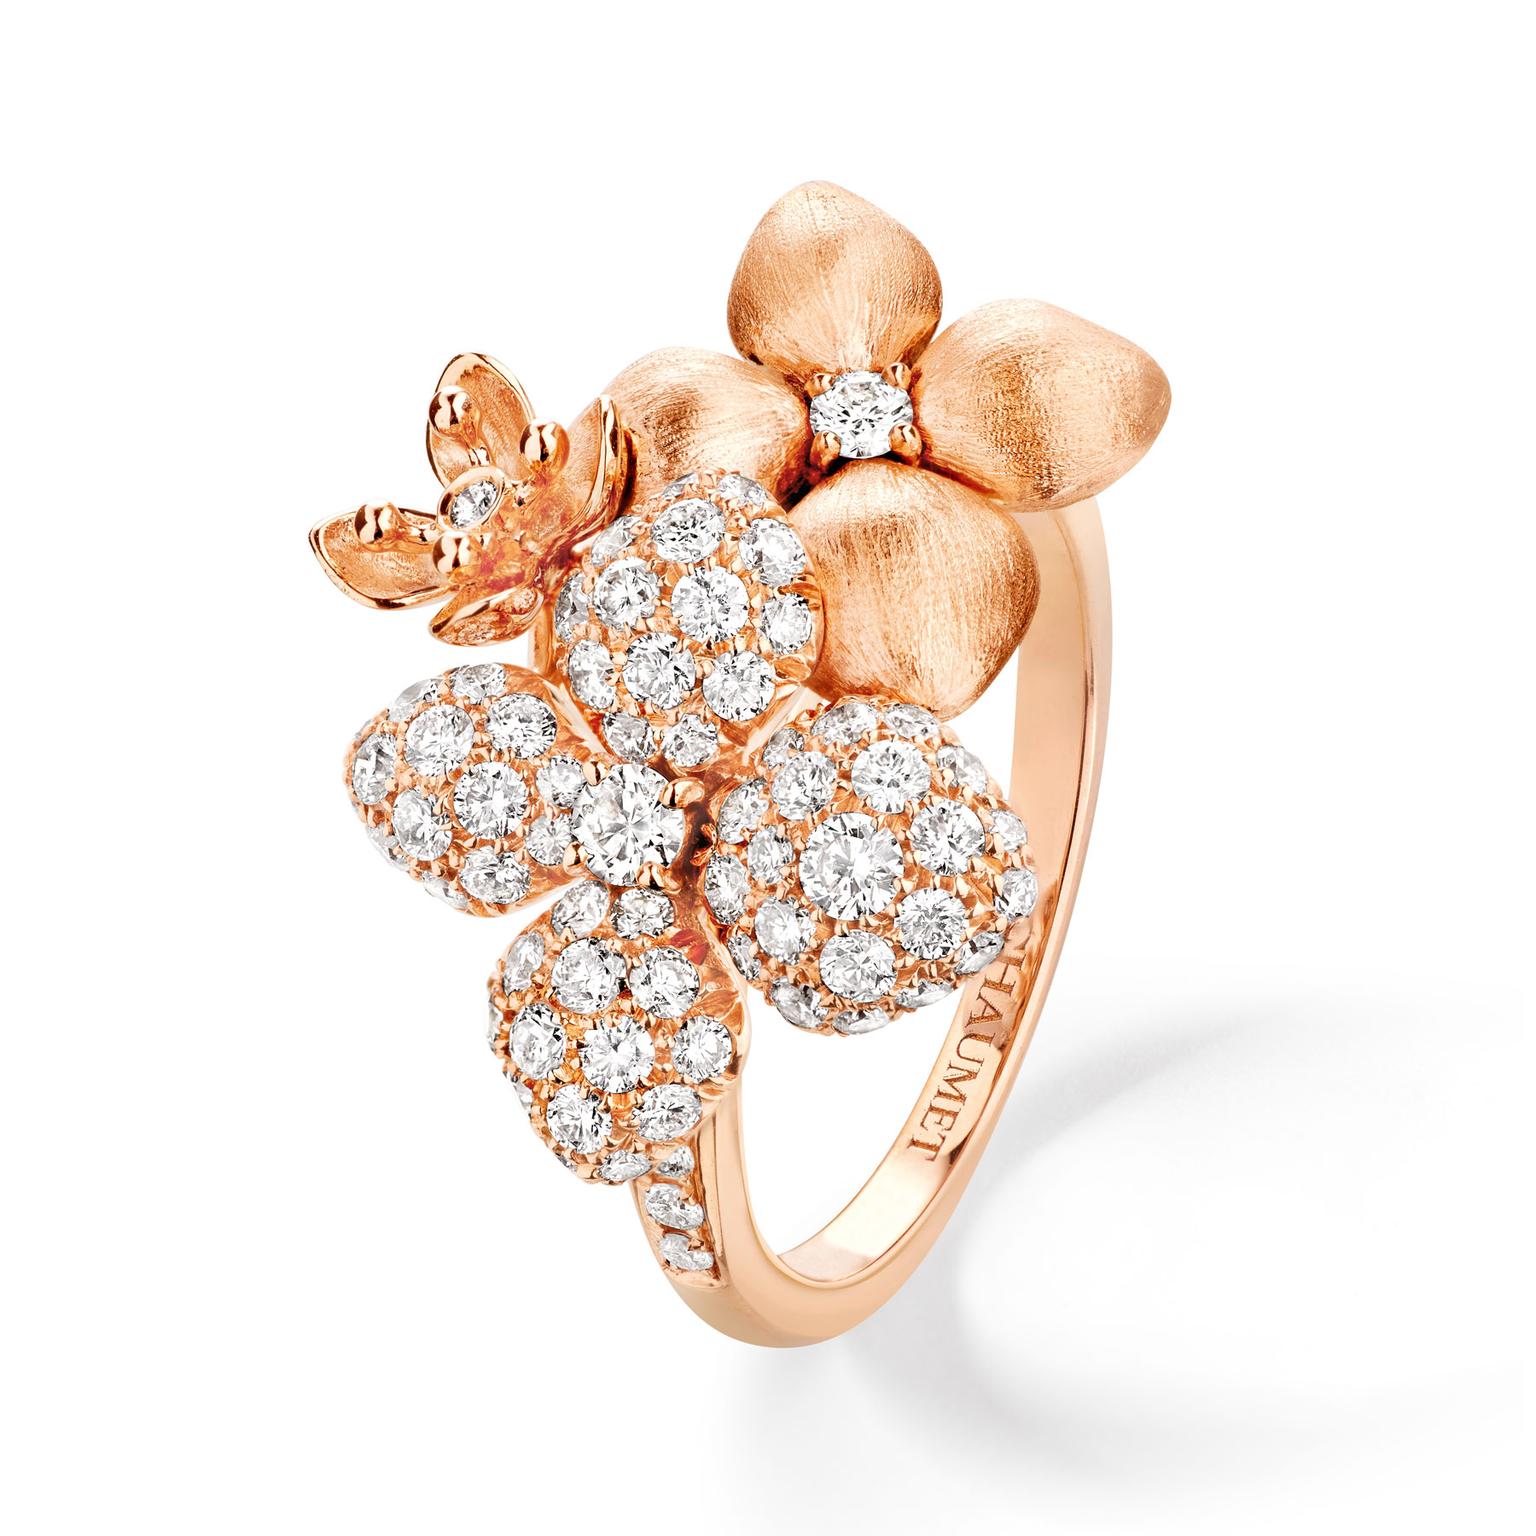 Hortensia Astres d’or brushed rose gold and diamond ring